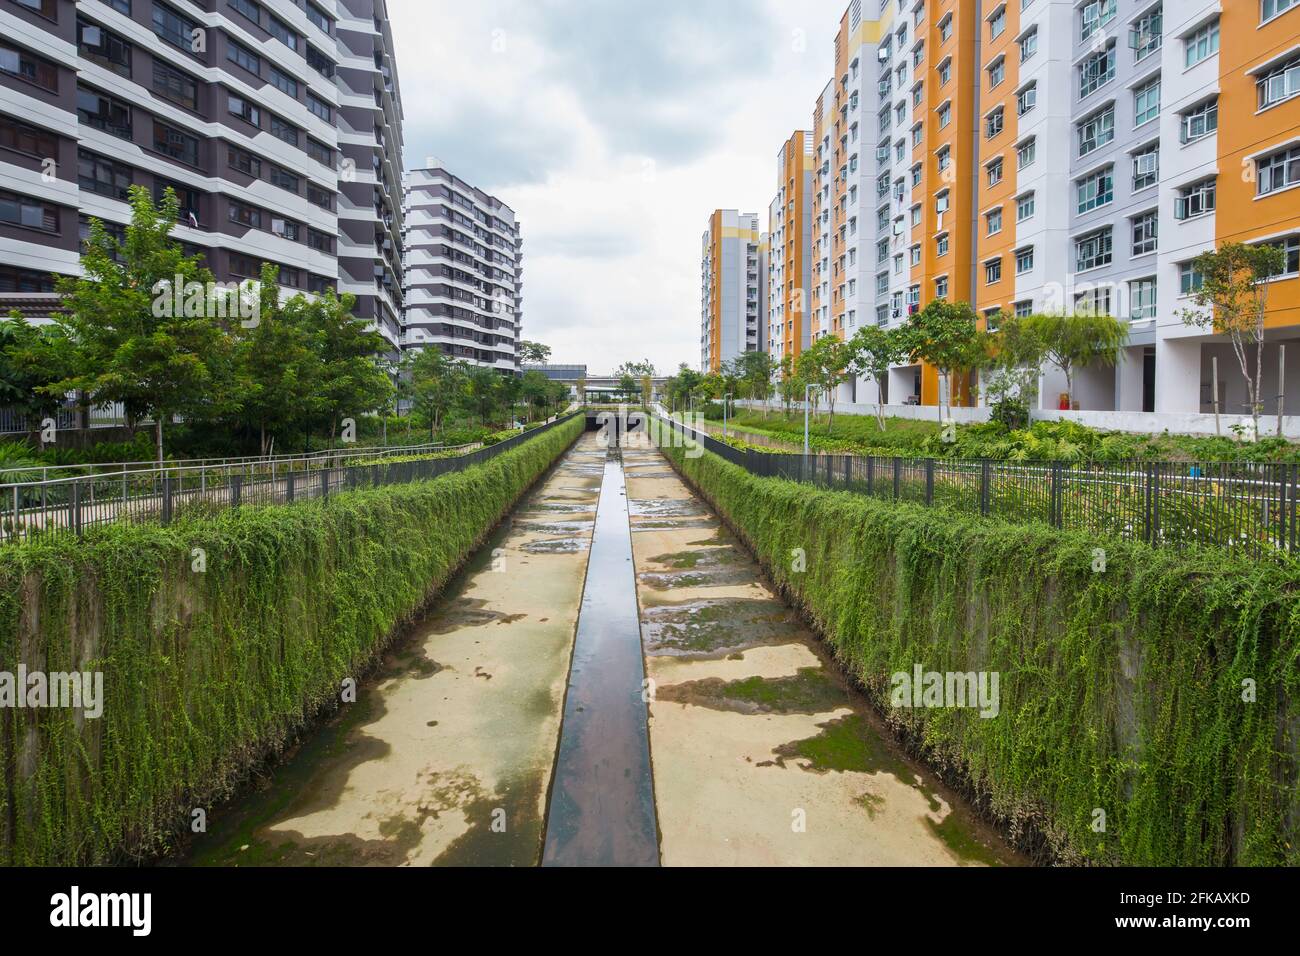 A man-made canal to channel the water during heavy rainfall, creepers plants are grown at the side walls and overall improve aesthetic look. Stock Photo